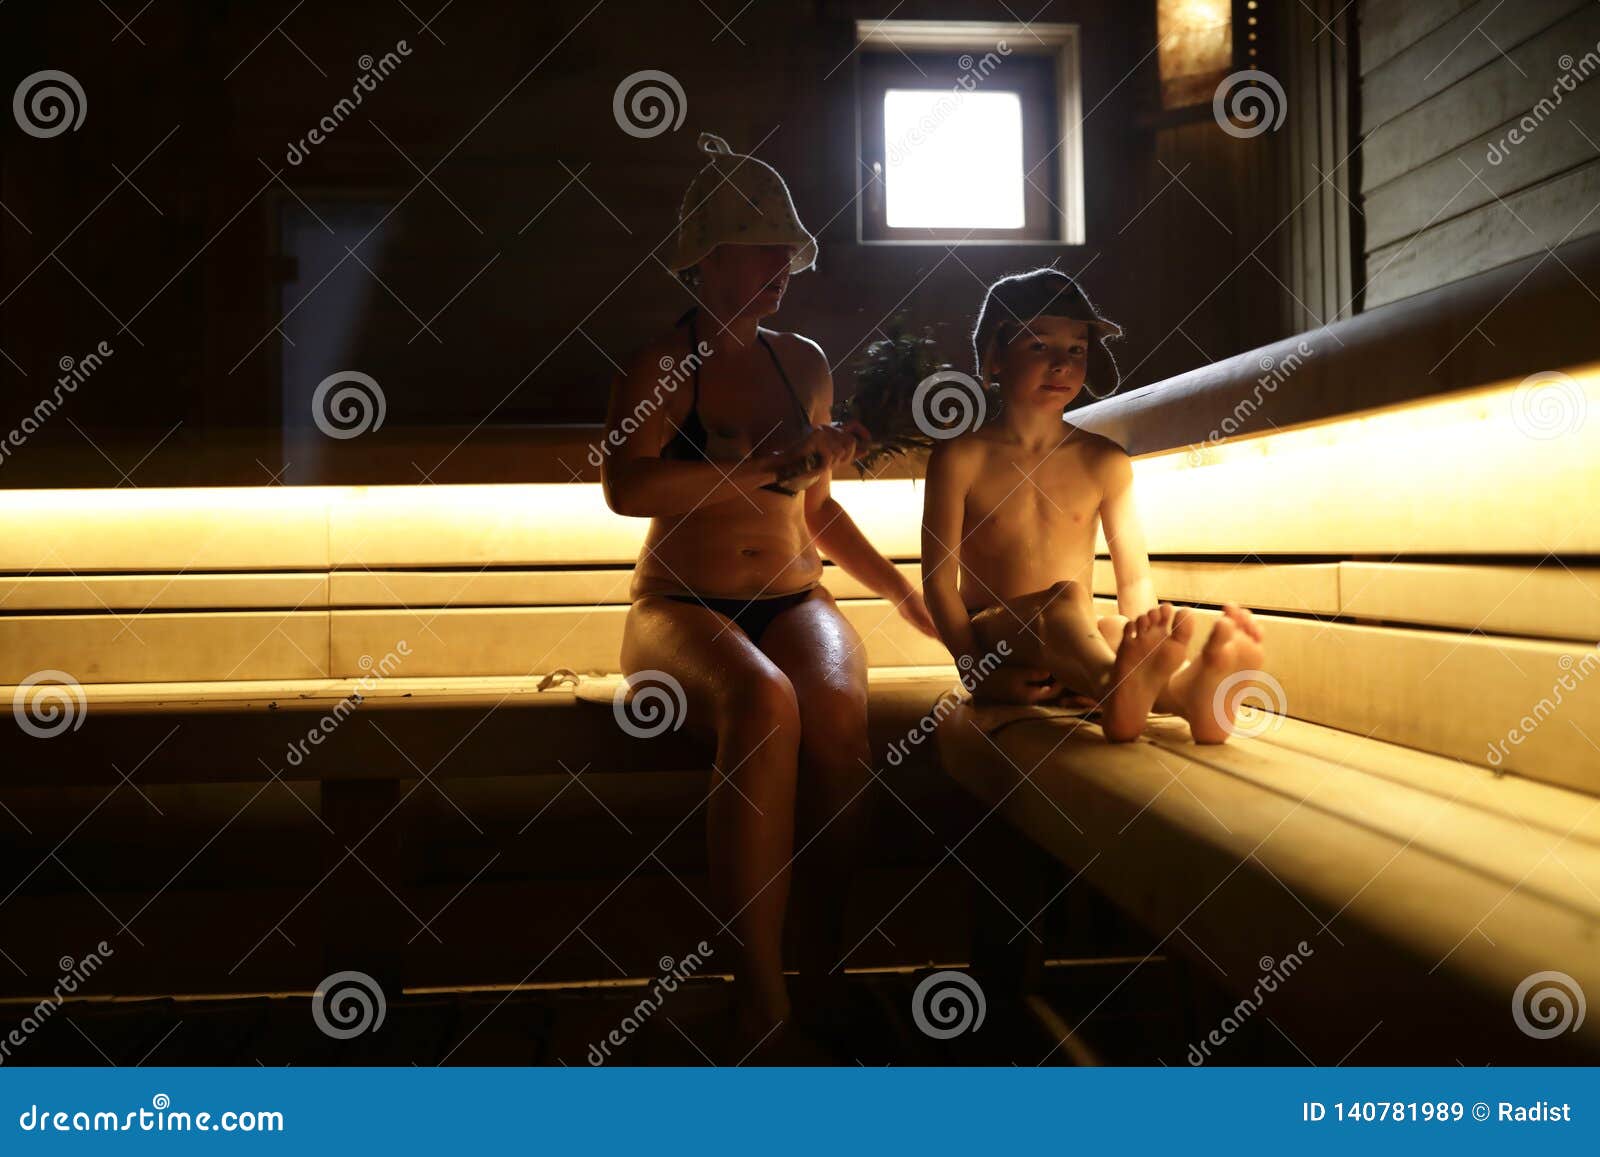 The banya steam bath is very important to russians фото 60